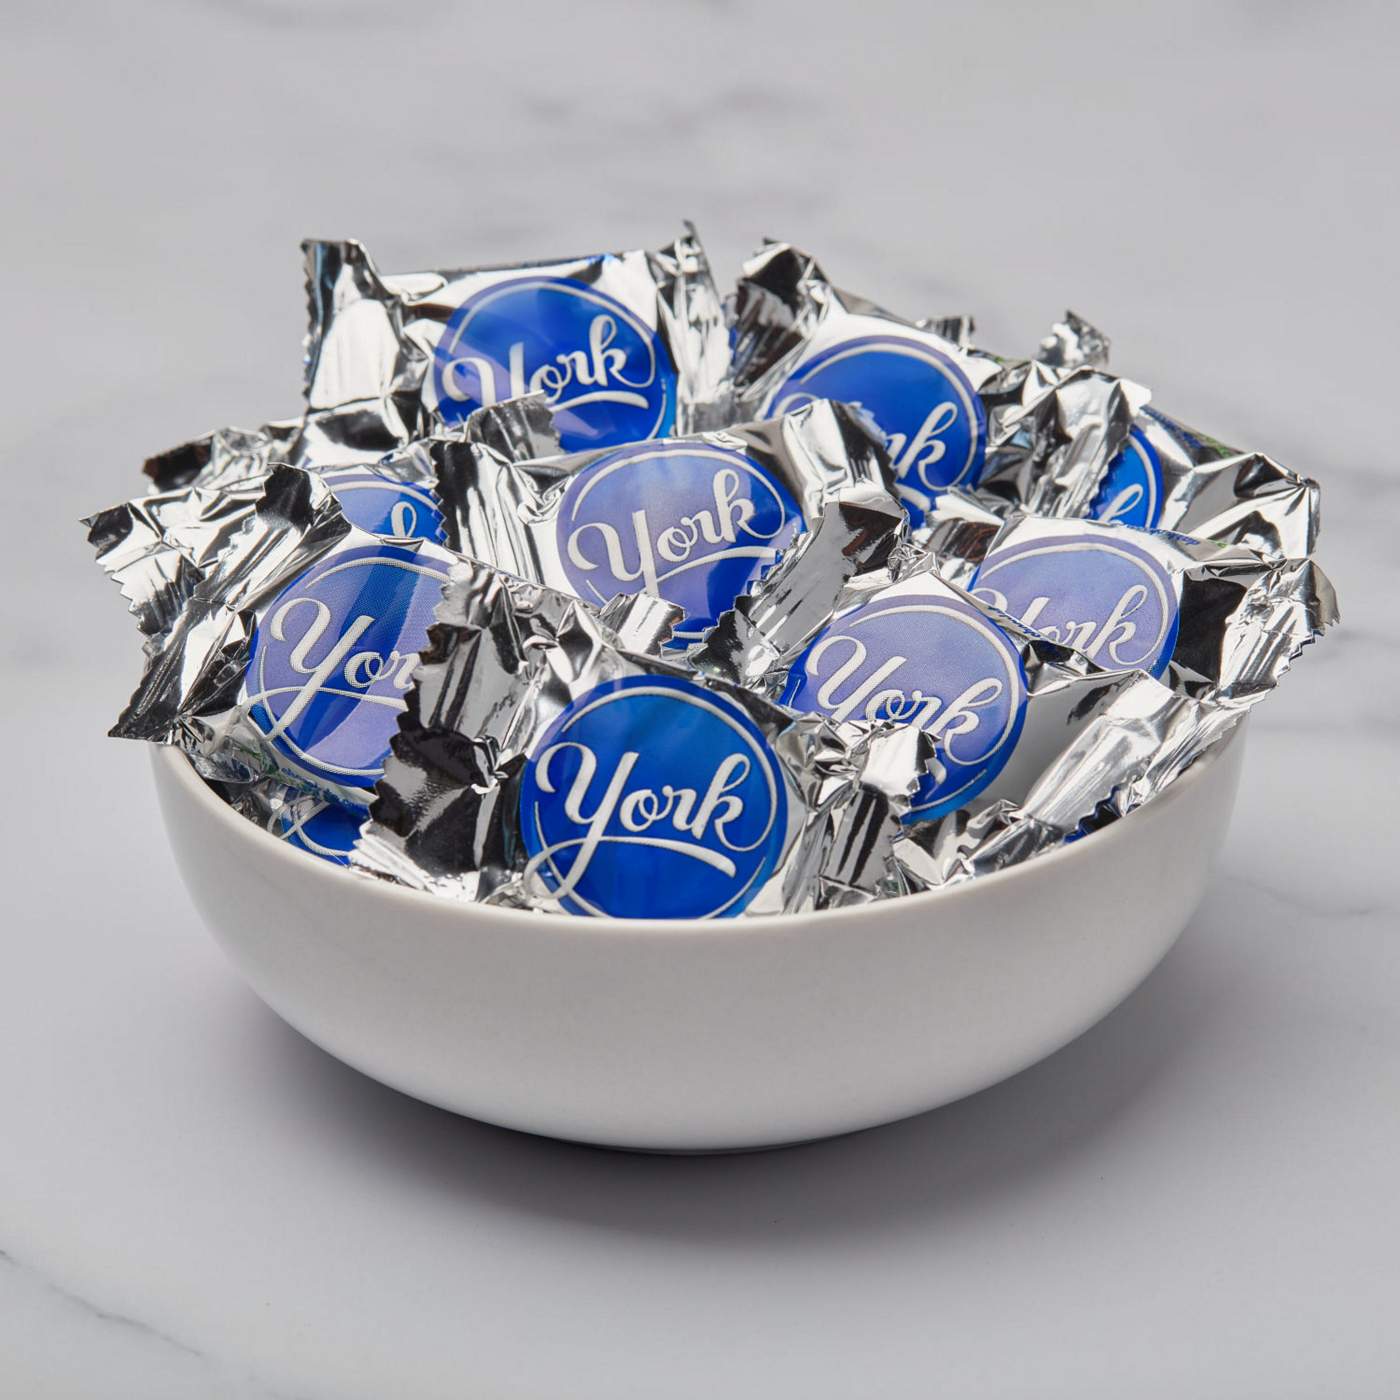 York Dark Chocolate Peppermint Patties Candy - Party Pack; image 4 of 7